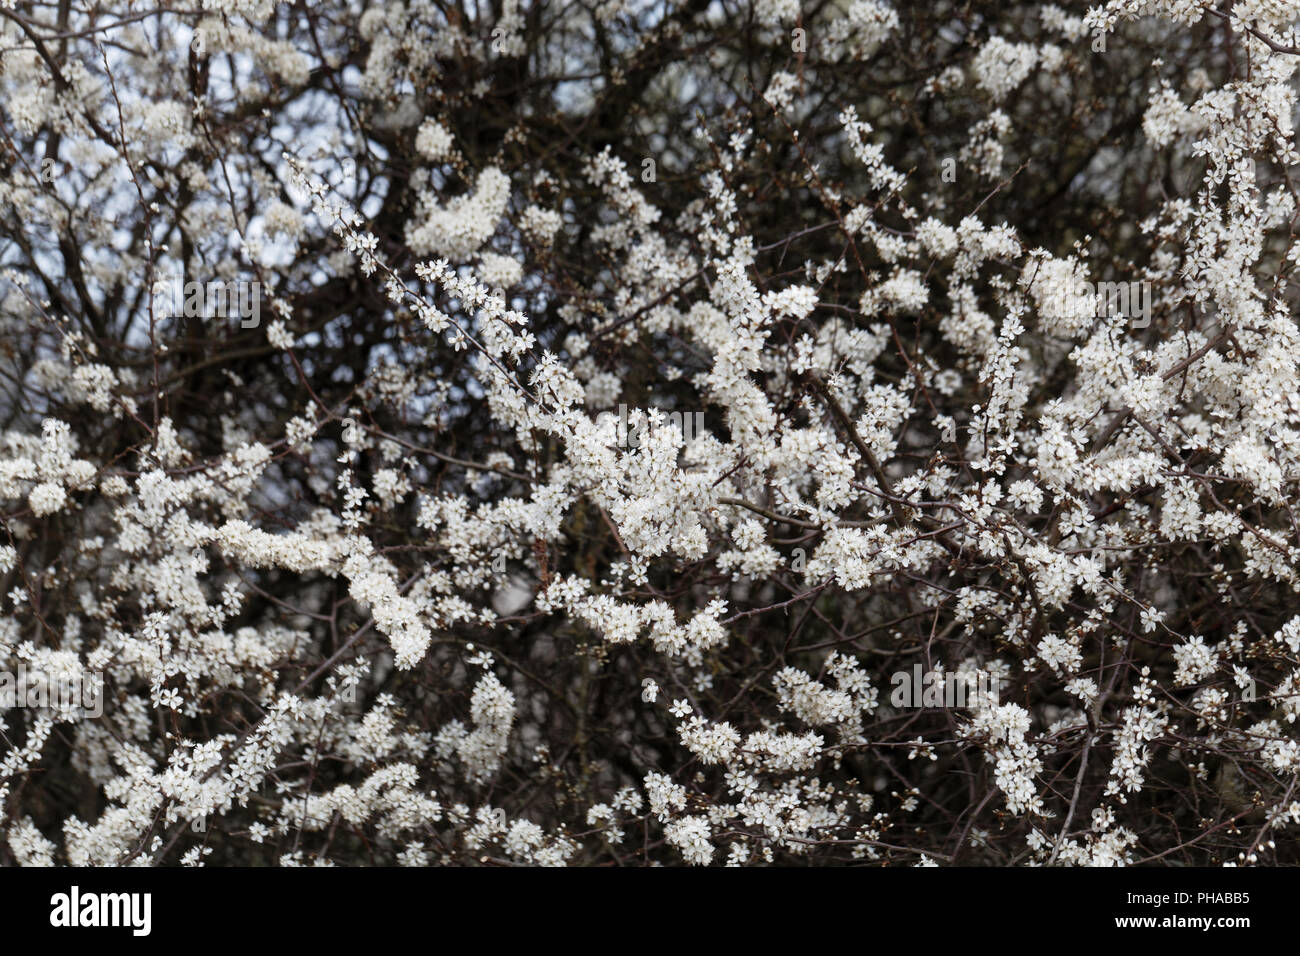 Flowers of a blackthorn (Prunus spinosa) Stock Photo